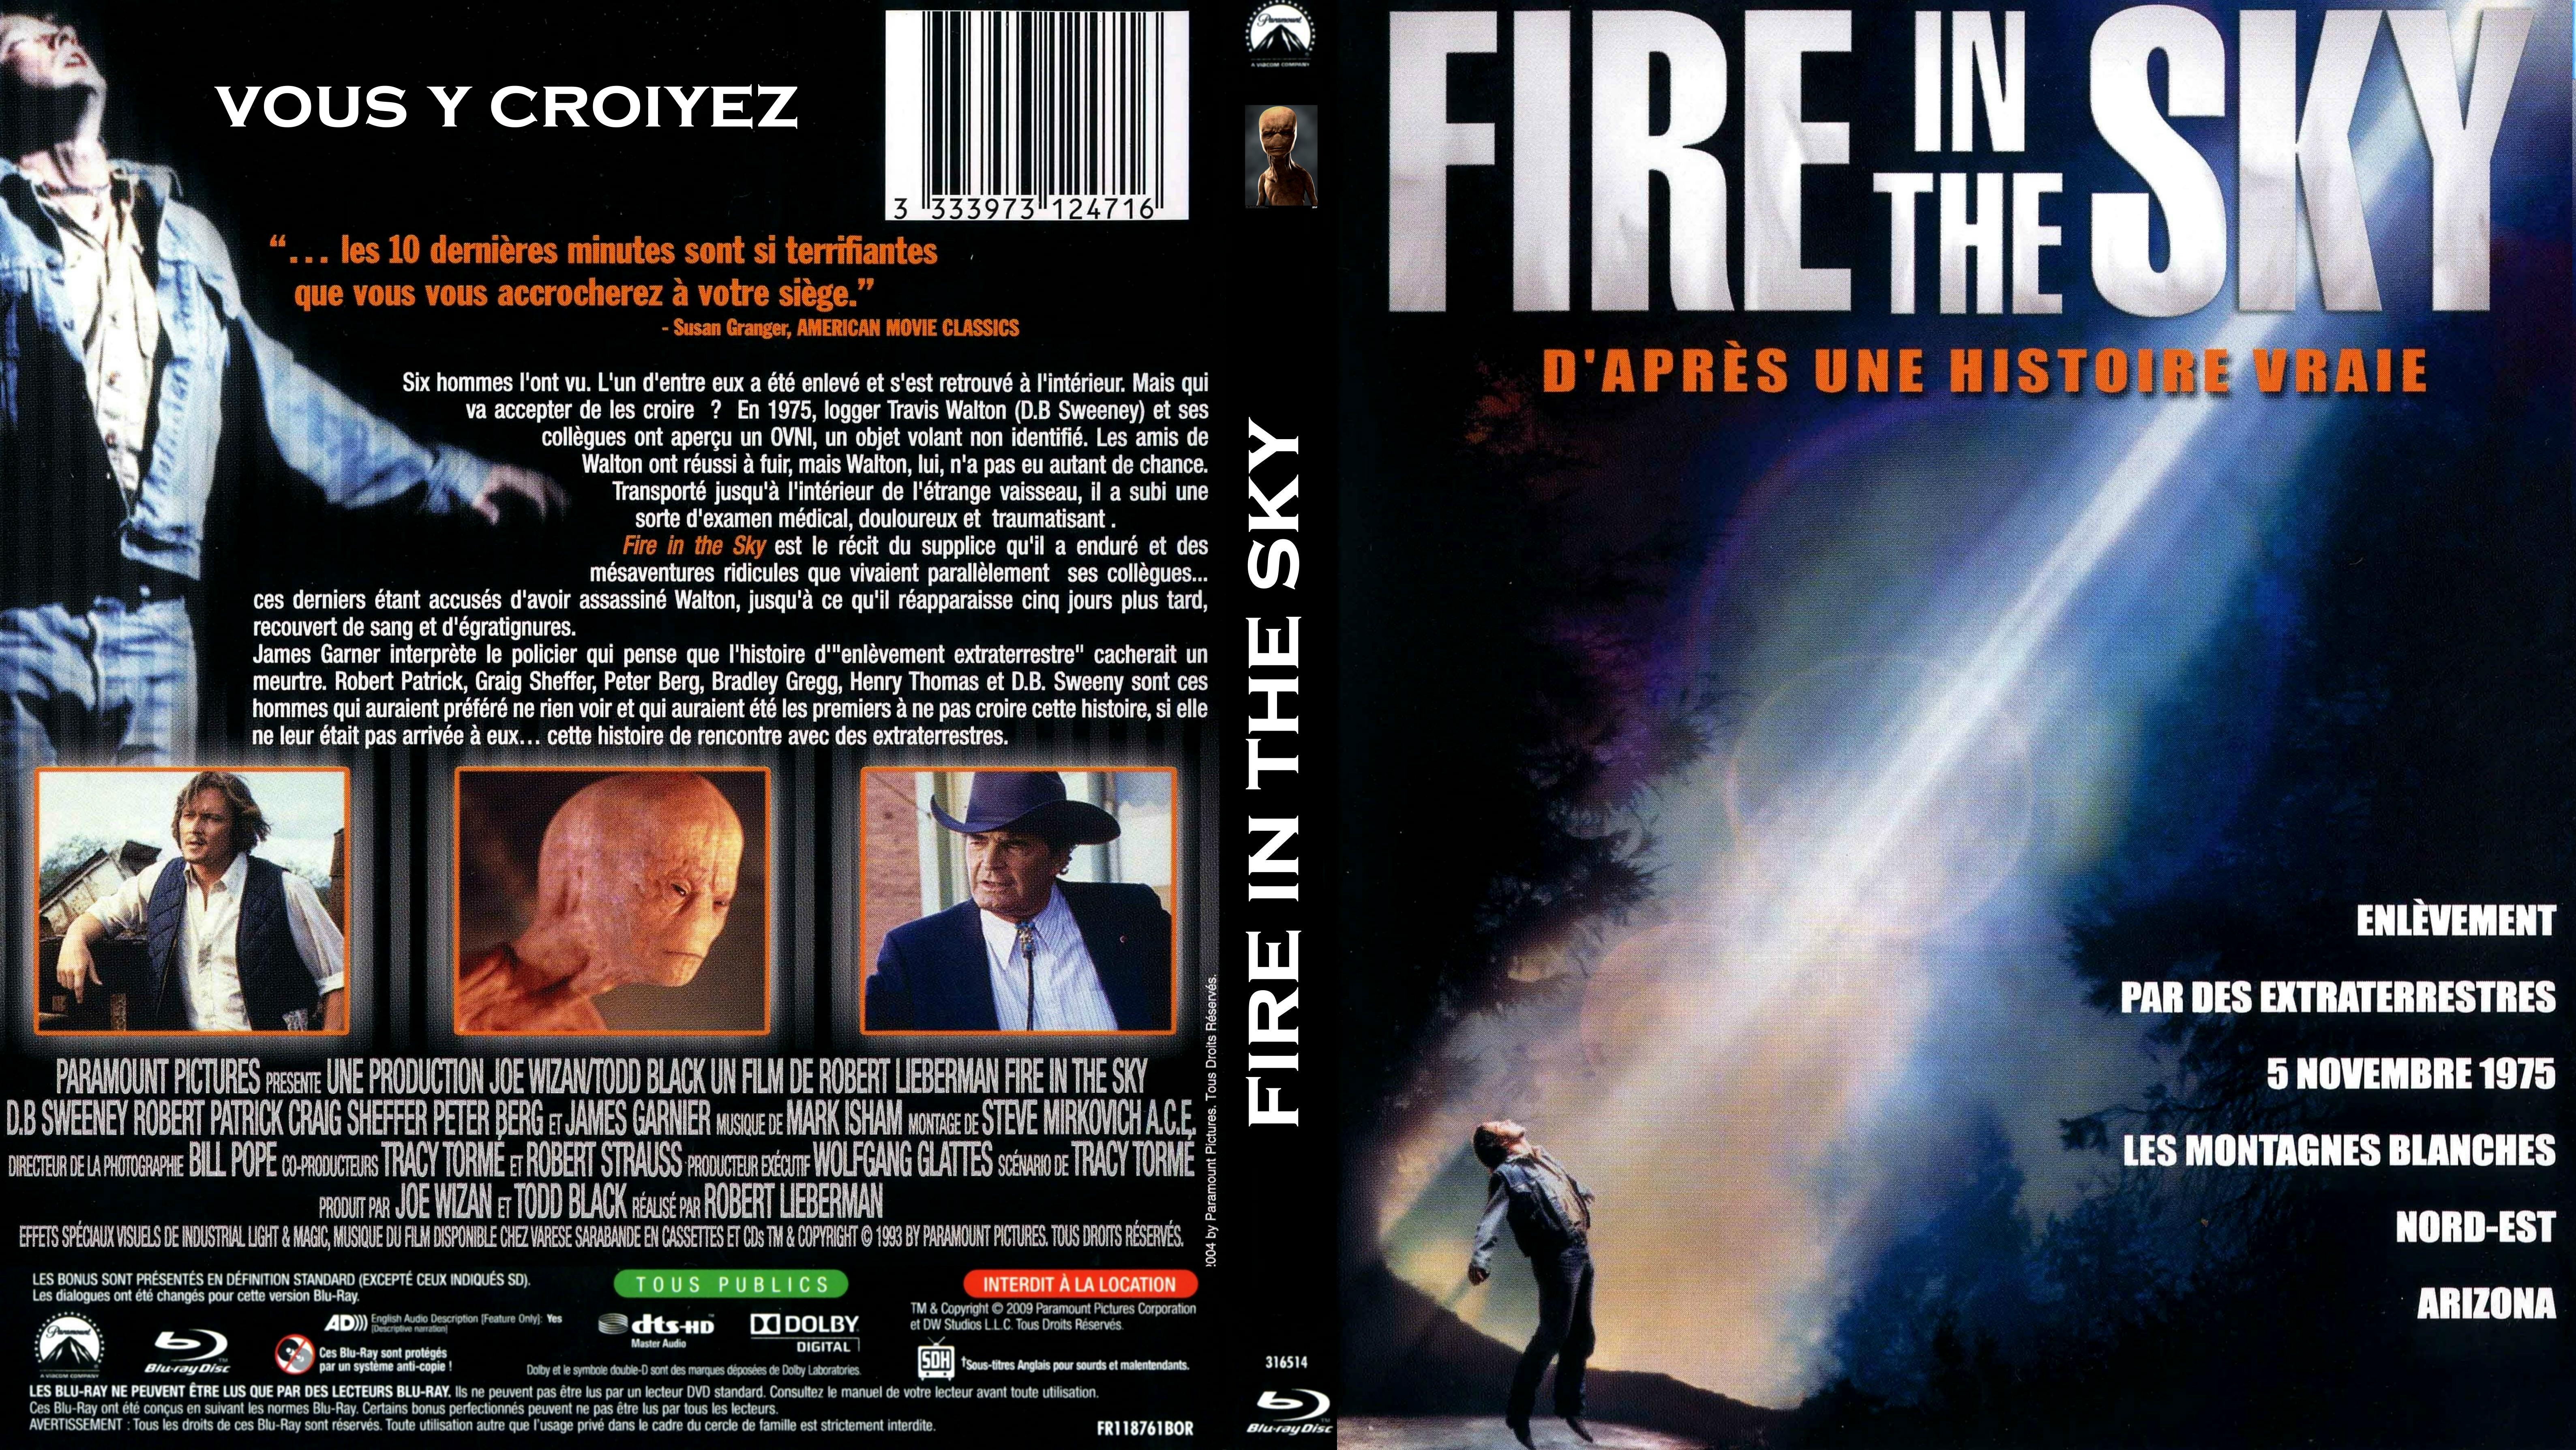 Jaquette DVD Fire in the sky (BLU-RAY)